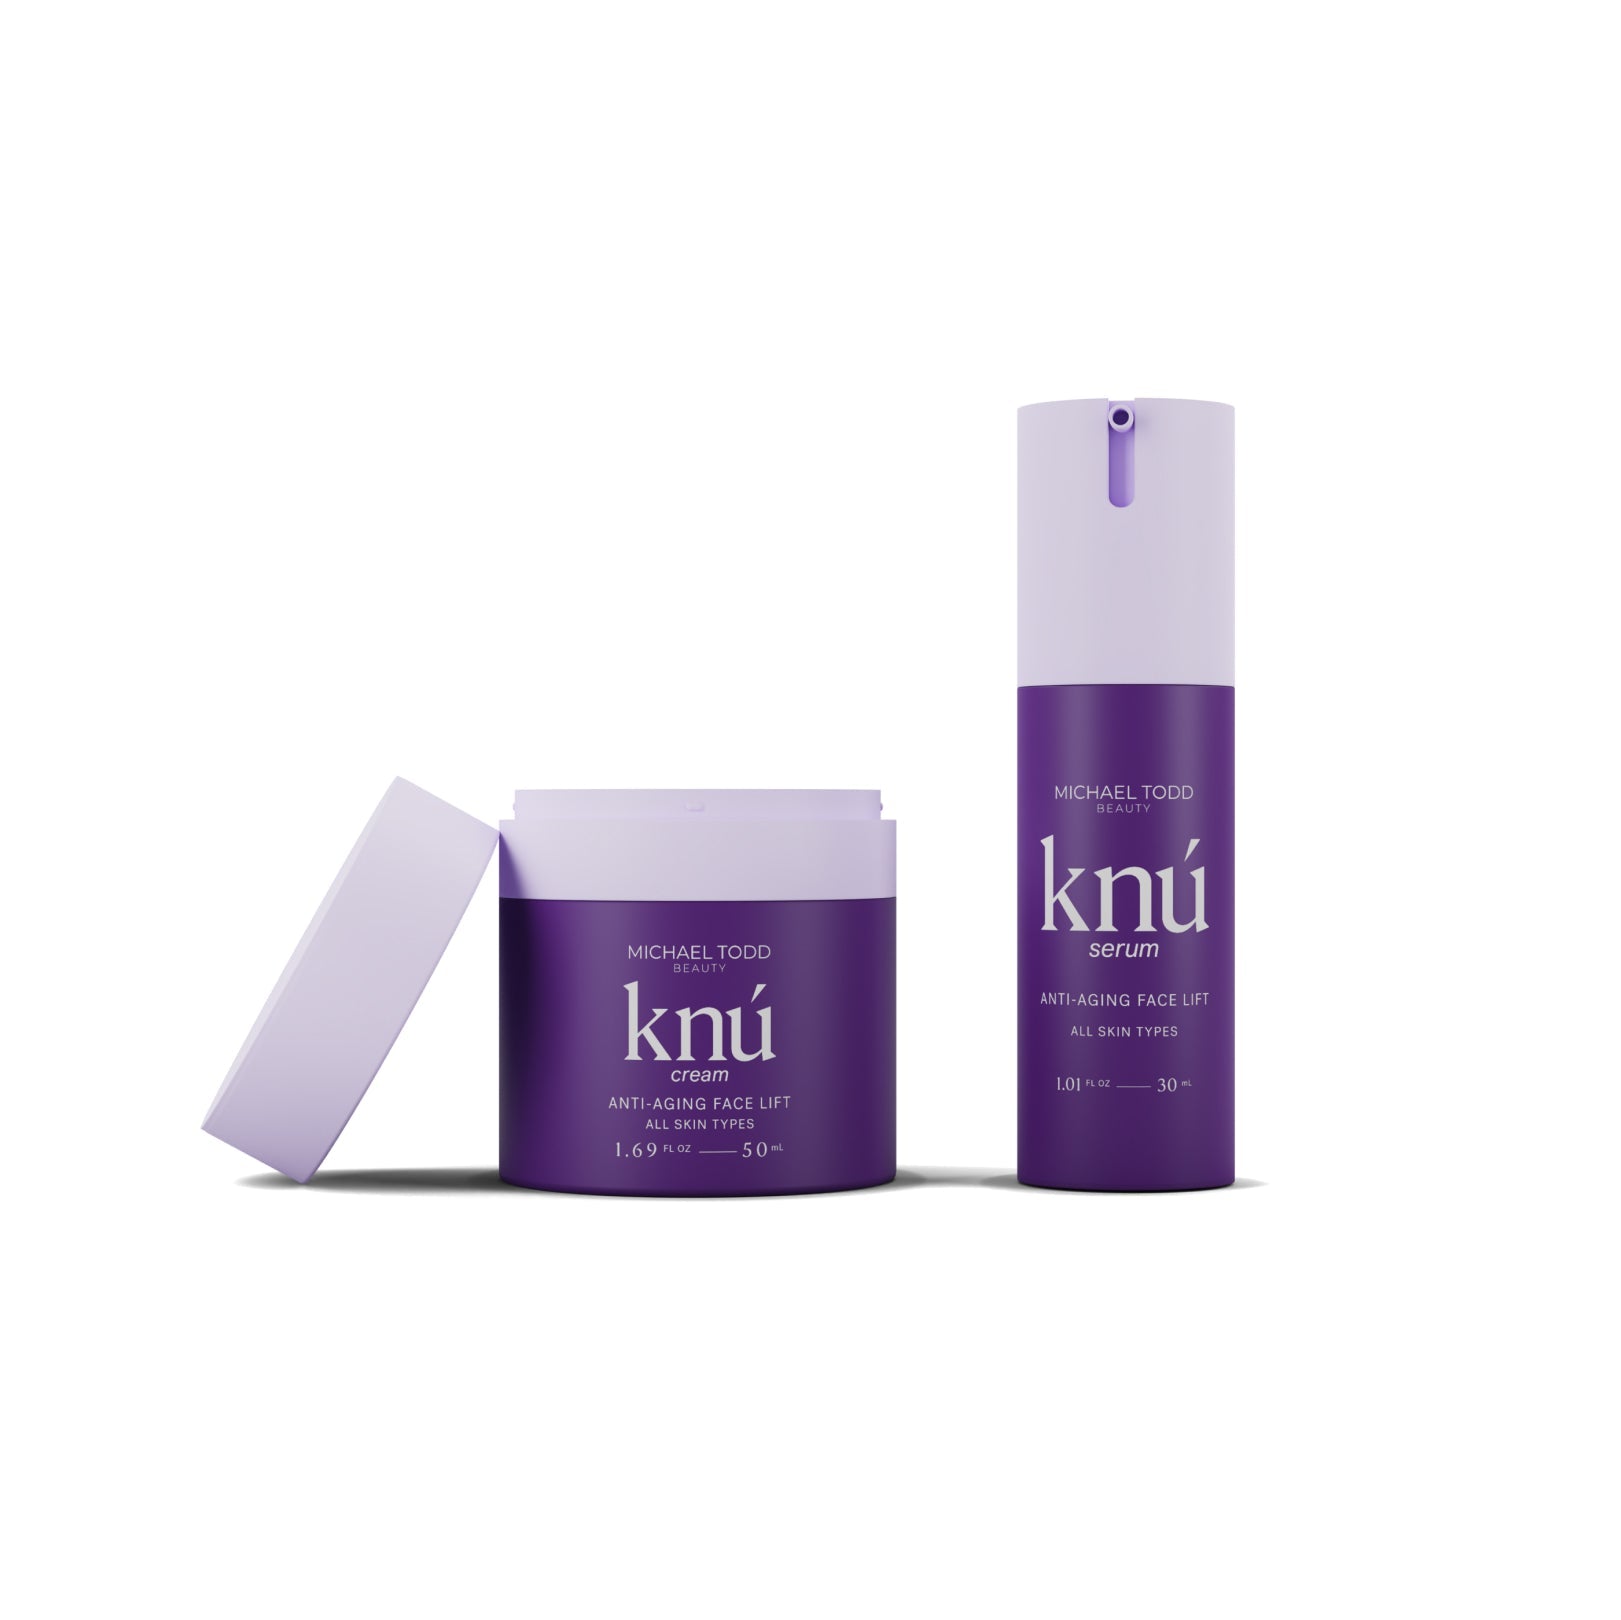 A bottle of The Knú Ageless Duo serum and a jar of The Knú Ageless Duo firmness.